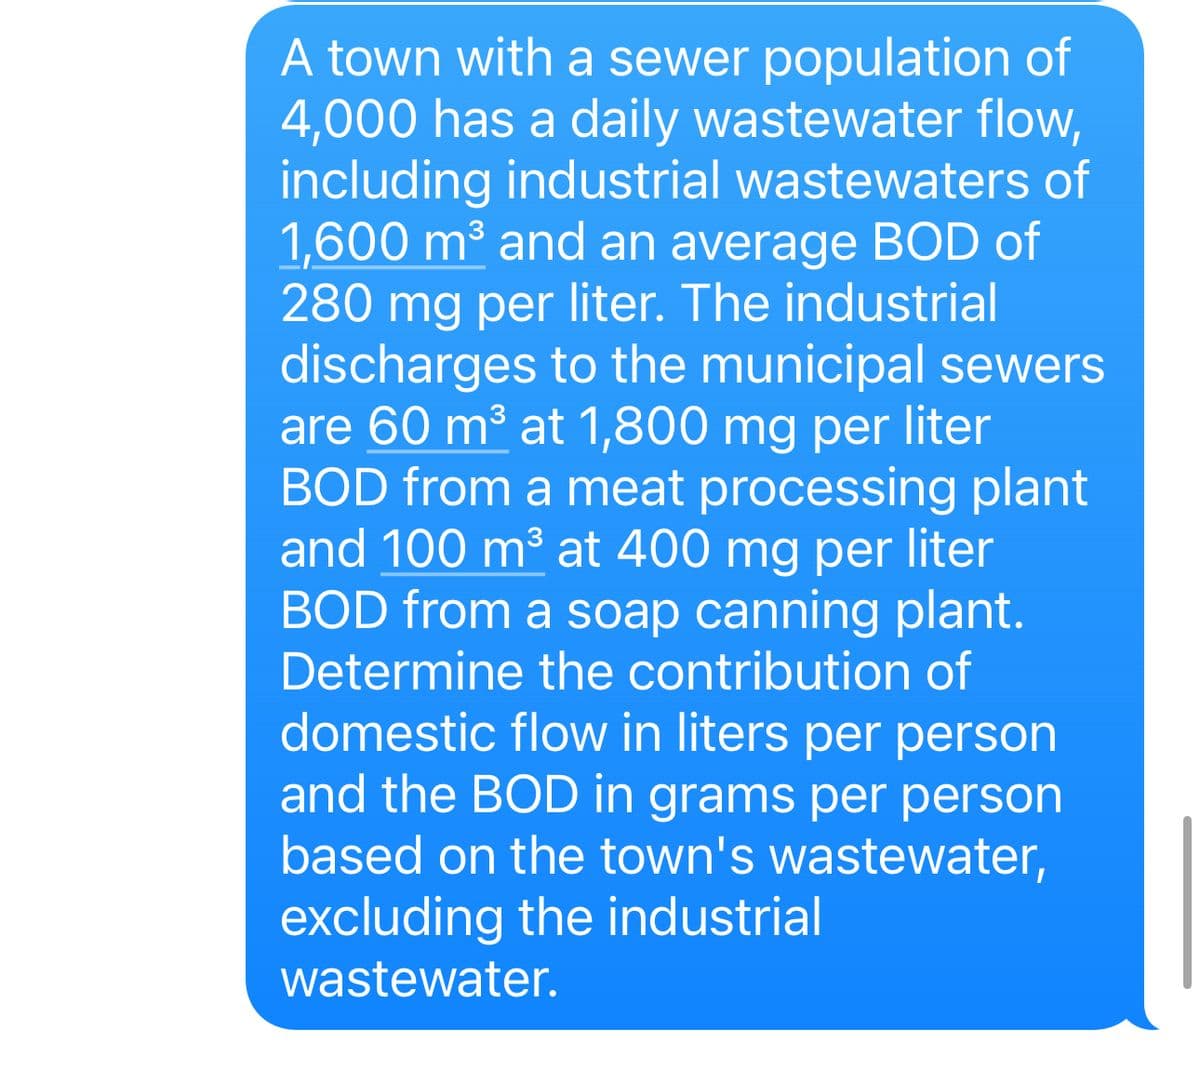 A town with a sewer population of
4,000 has a daily wastewater flow,
including industrial wastewaters of
1,600 m³ and an average BOD of
280 mg per liter. The industrial
discharges to the municipal sewers
are 60 m³ at 1,800 mg per liter
BOD from a meat processing plant
and 100 m³ at 400 mg per liter
BOD from a soap canning plant.
Determine the contribution of
domestic flow in liters per person
and the BOD in grams per person
based on the town's wastewater,
excluding the industrial
wastewater.